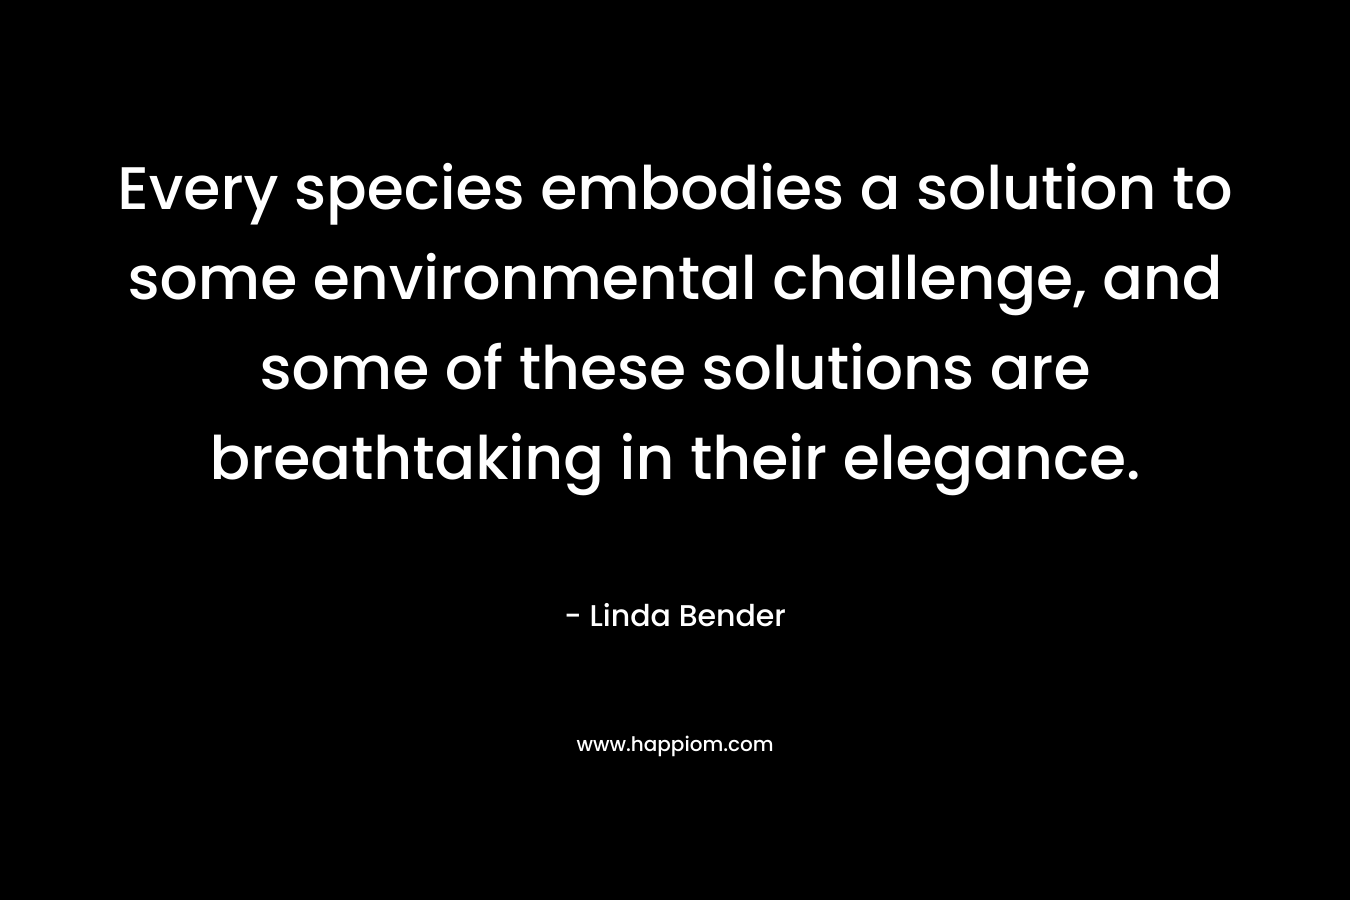 Every species embodies a solution to some environmental challenge, and some of these solutions are breathtaking in their elegance. – Linda Bender